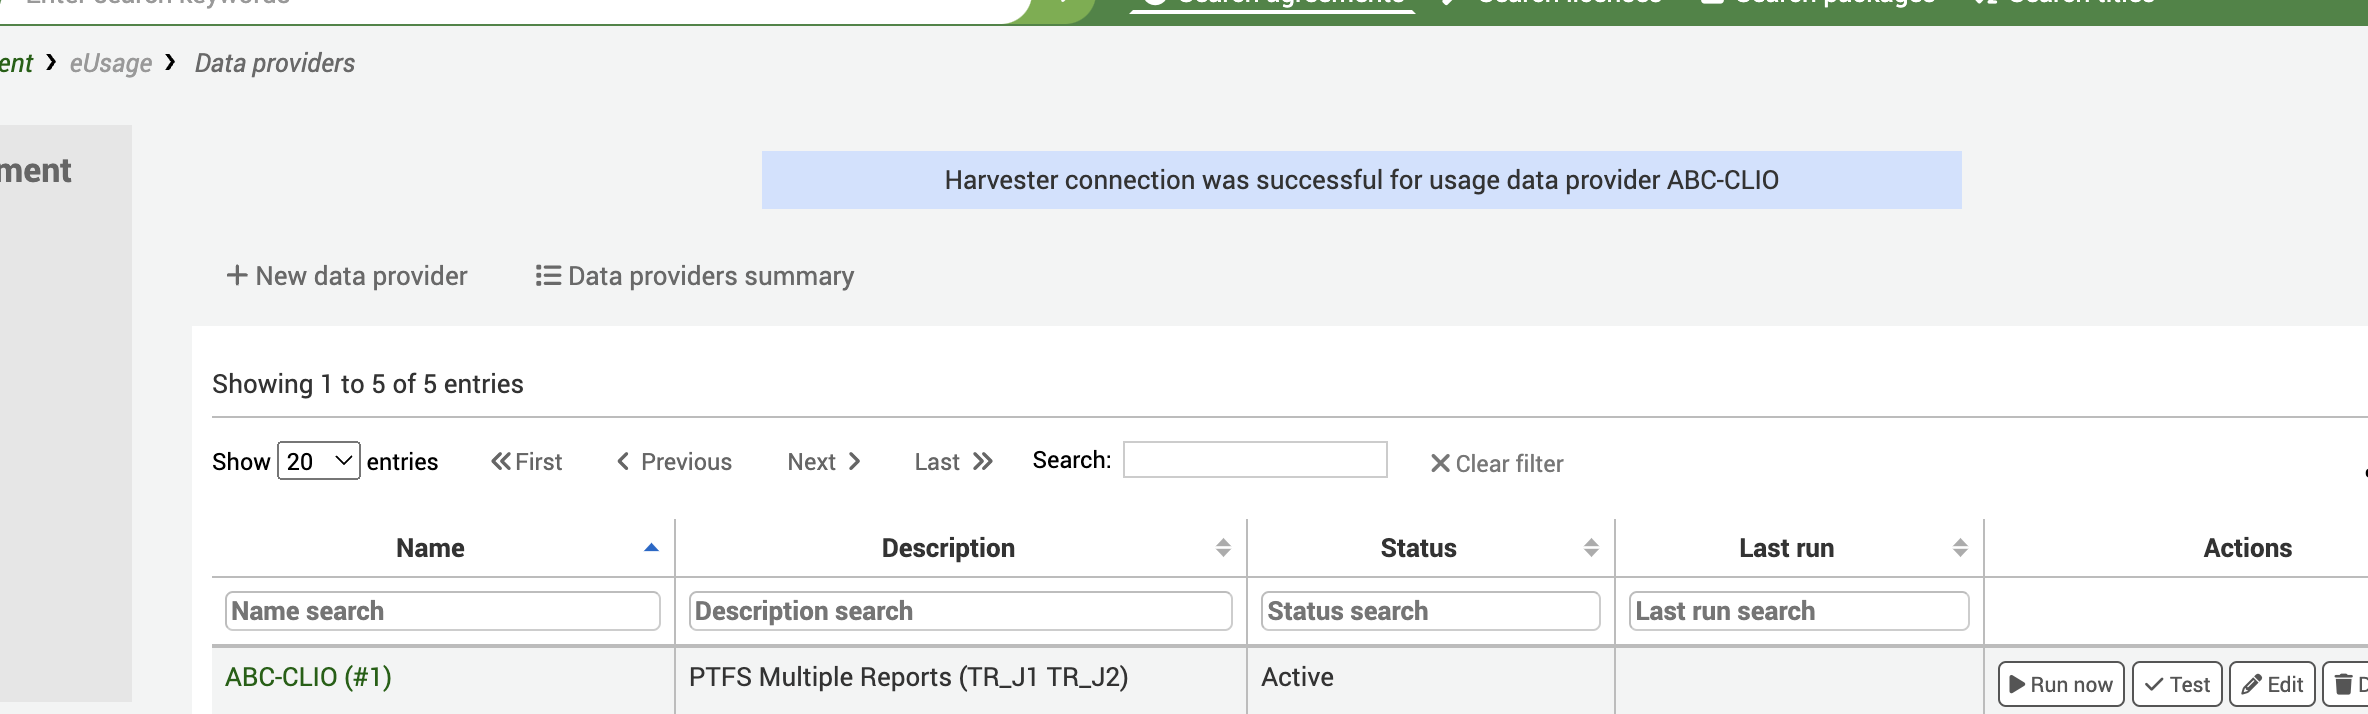 Data providers screen with the message: 'Harvester connection was successful for usage data provider ABC-CLIO'.